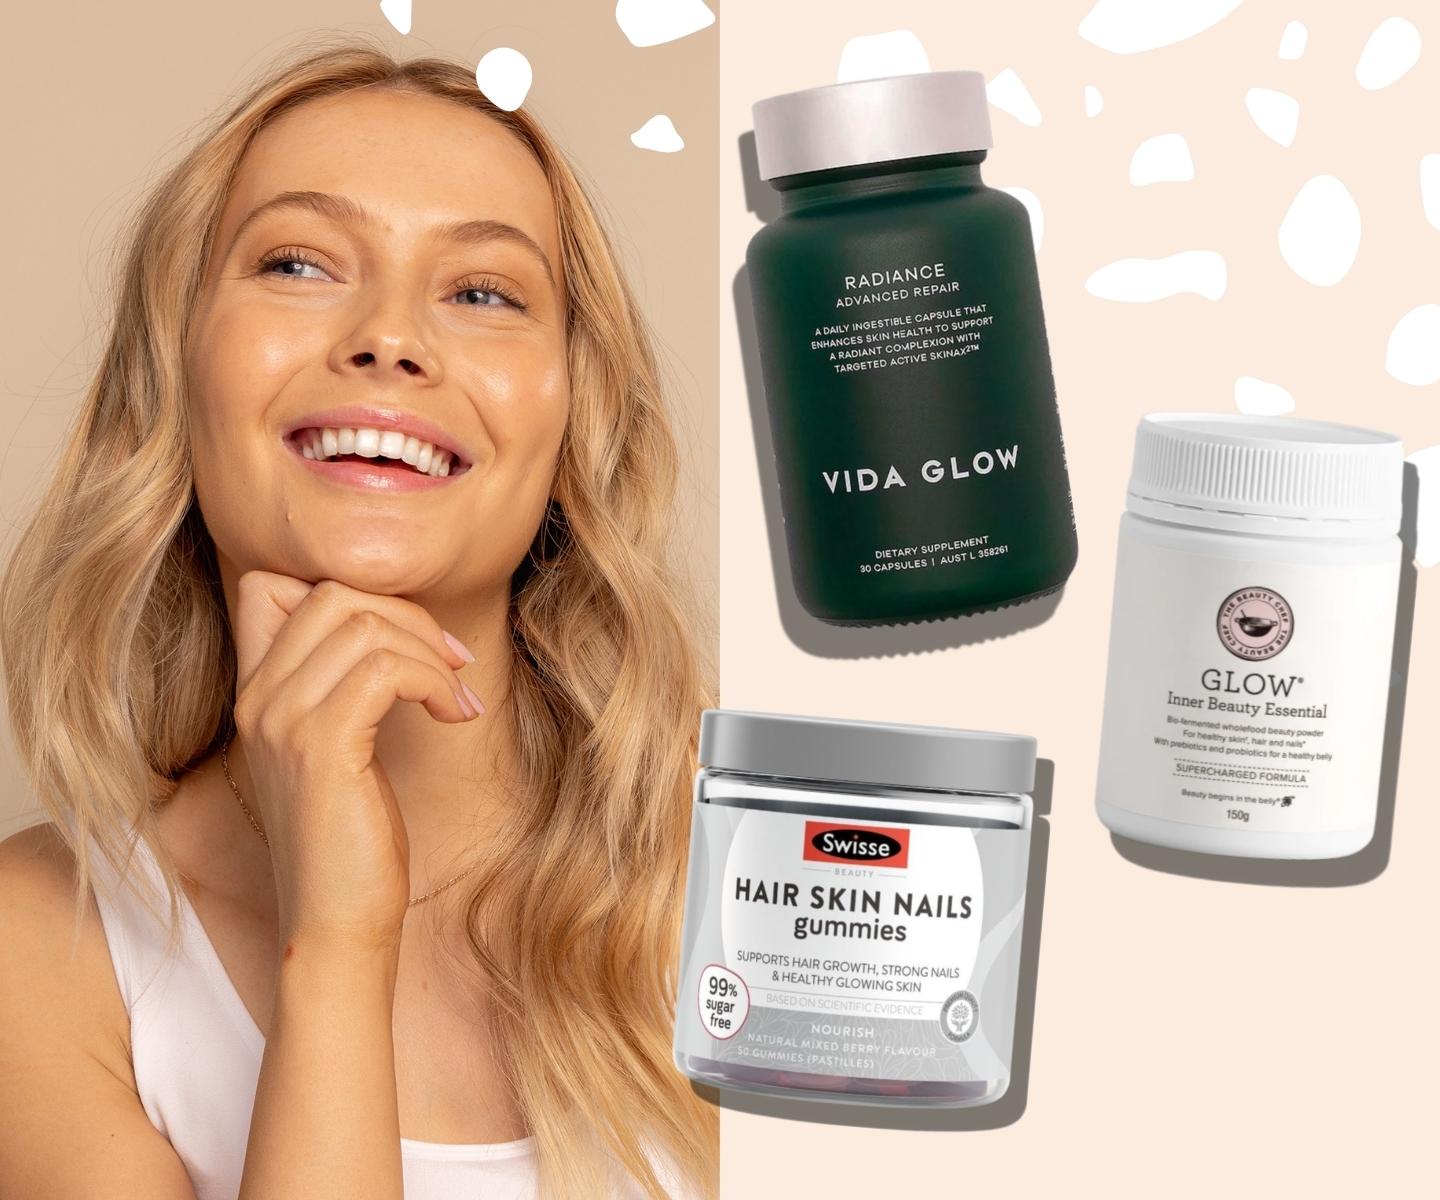 Supplements for Skin-Vida Glow Radiance Advanced Repair 30 Capsules, The Beauty Chef Glow Inner Beauty Essential, Swisse Beauty Hair Skin Nails Gummies